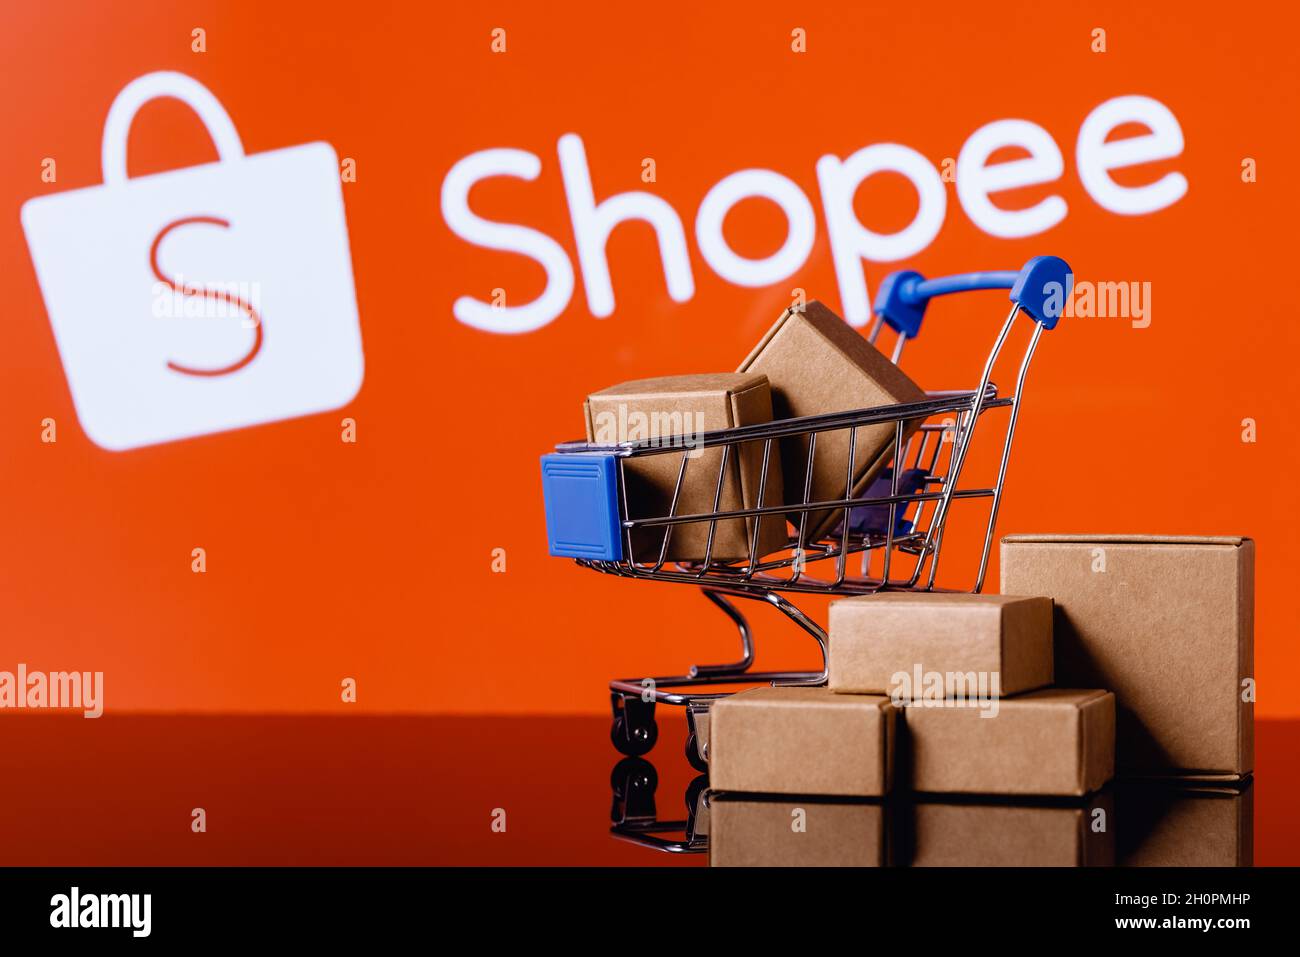 Shopee is e-commerce technology company. Shopping cart with parcels on the background of the Shopee logo. Stock Photo